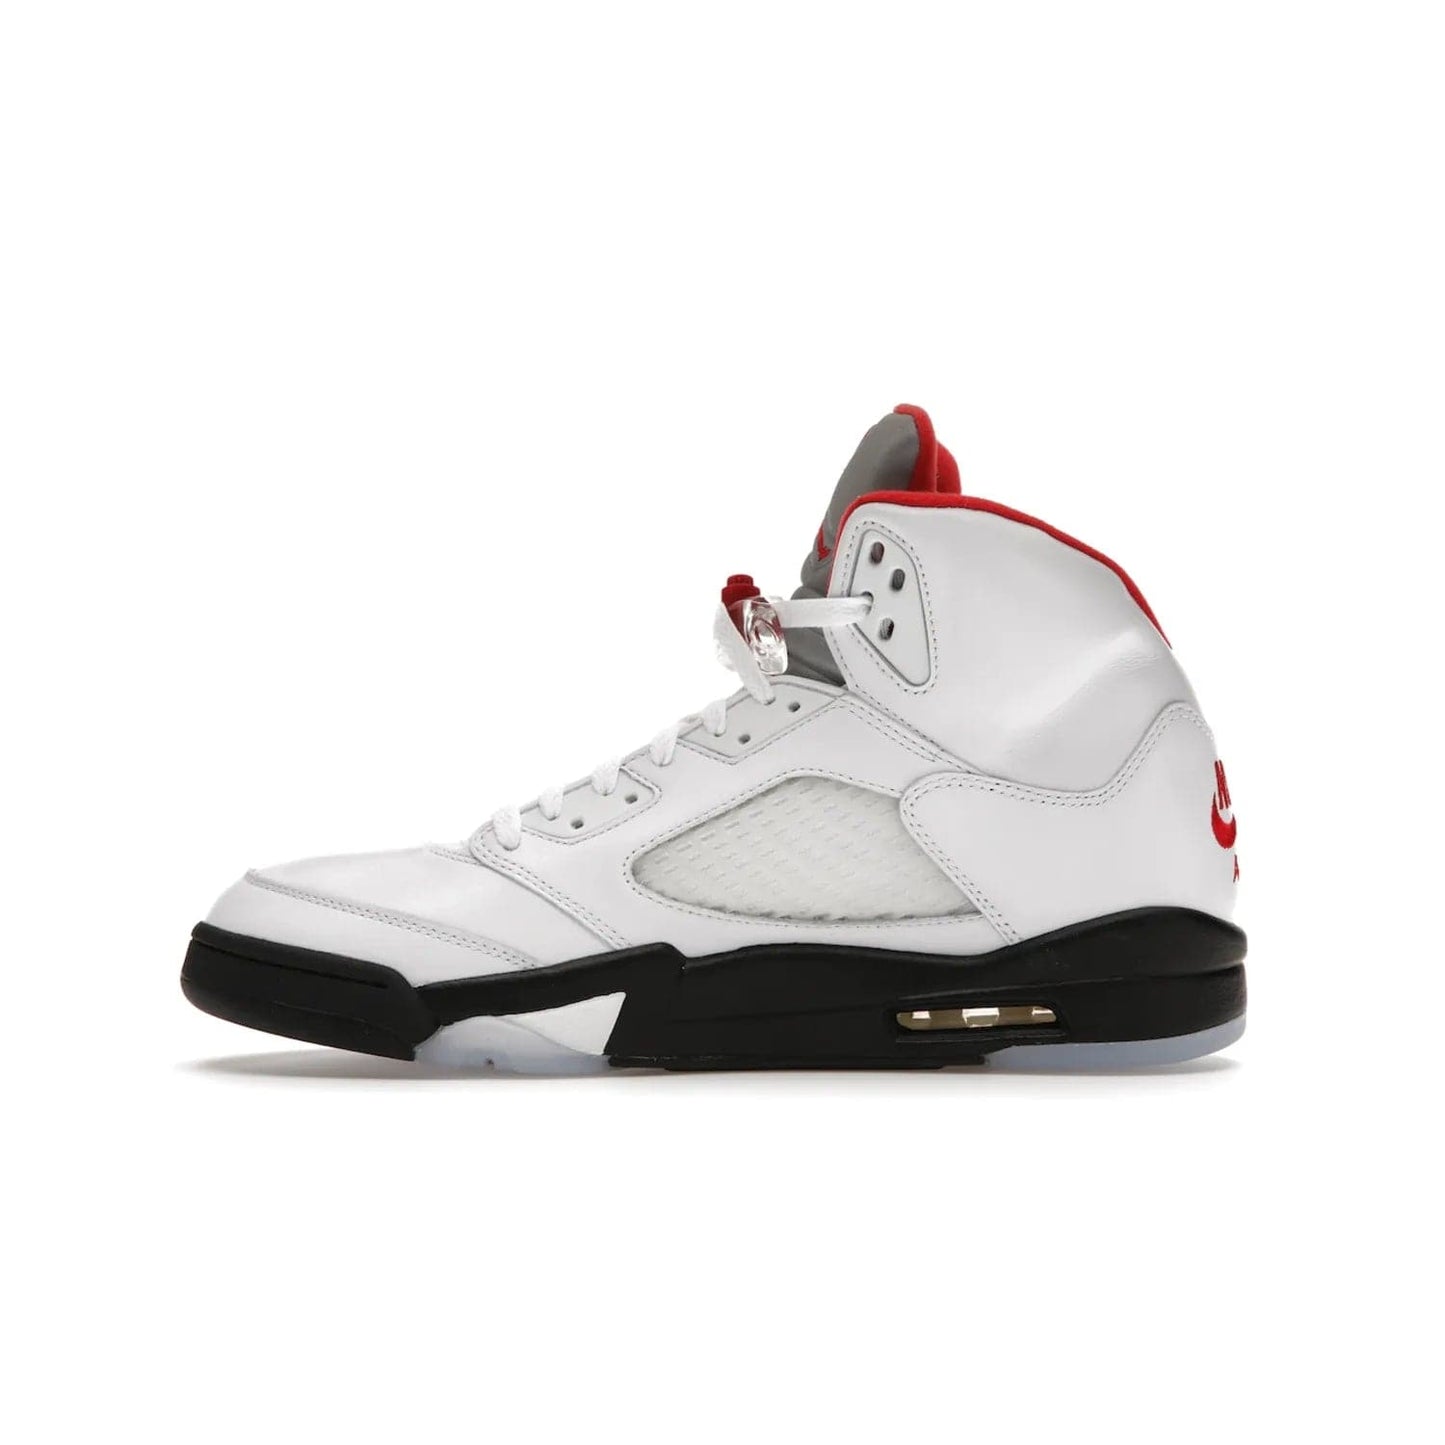 Jordan 5 Retro Fire Red Silver Tongue (2020) - Image 19 - Only at www.BallersClubKickz.com - Experience classic styling with the Jordan 5 Retro Fire Red Silver Tongue (2020). Features a white leather upper, 3M reflective tongue, midsole colorblocking, and an icy translucent outsole. Now available, upgrade your shoe collection today.